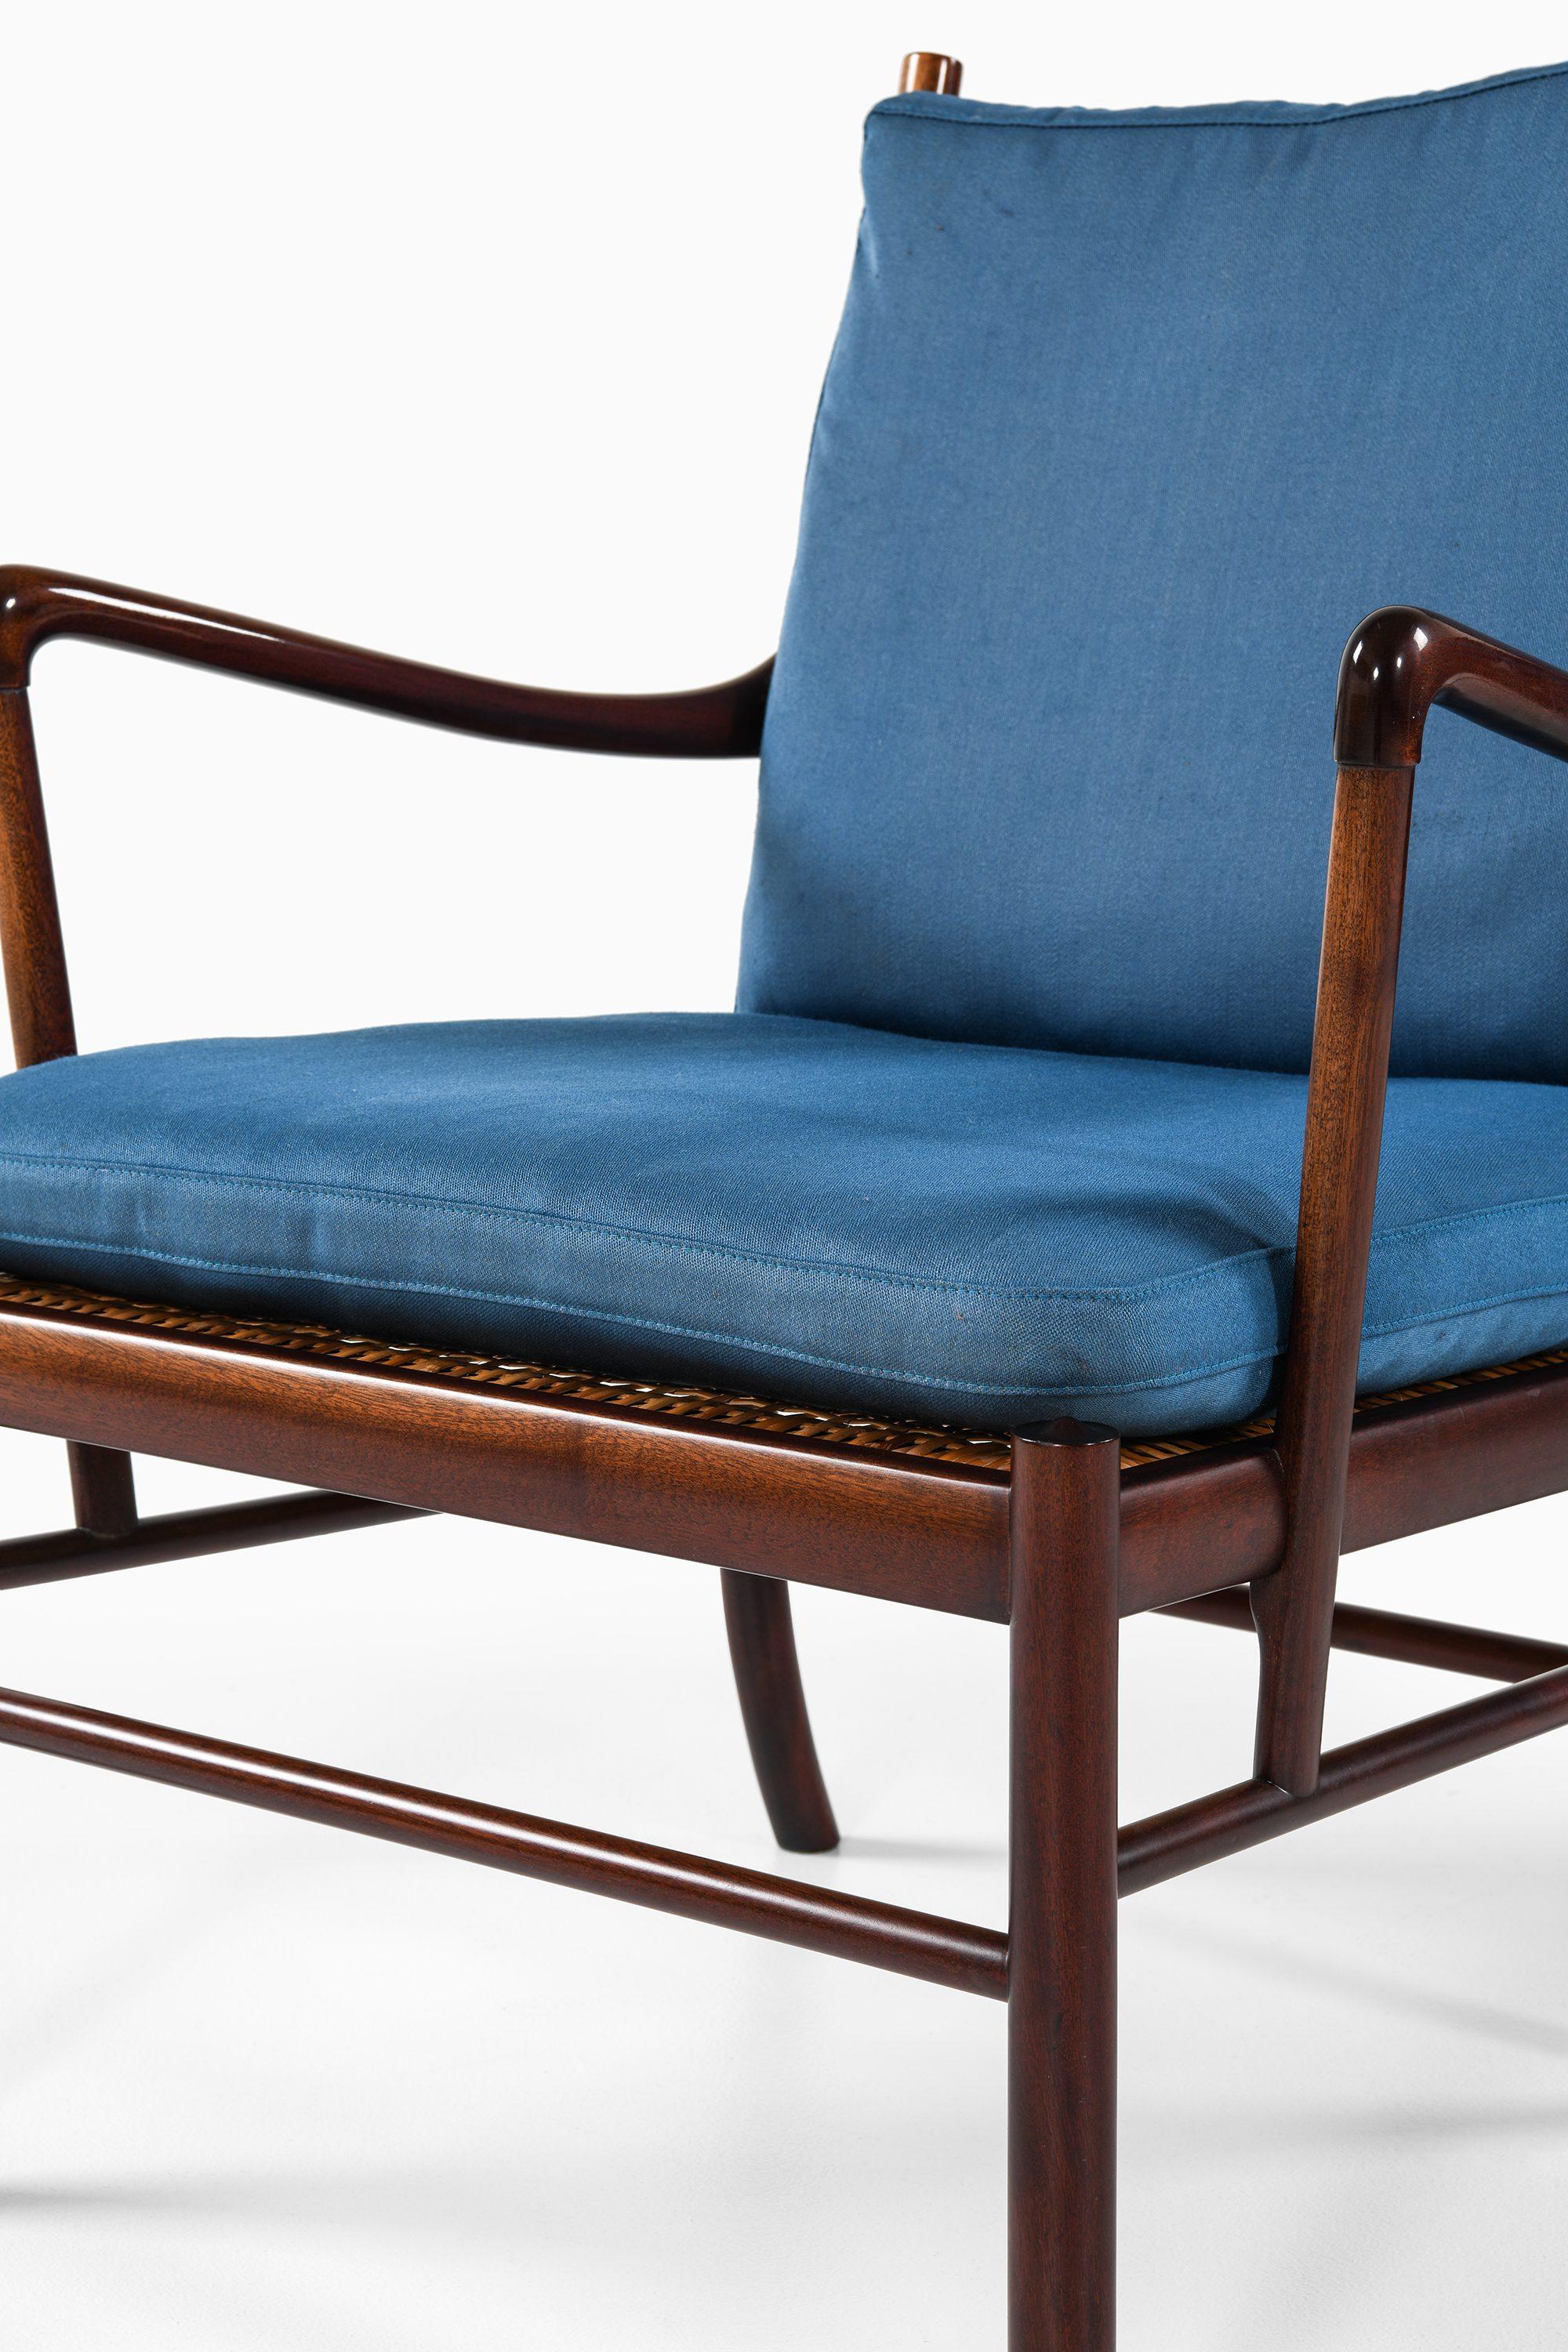 Colonial Easy Chairs in Mahogany, Woven Cane and Fabric by Ole Wanscher, 1960's For Sale 2